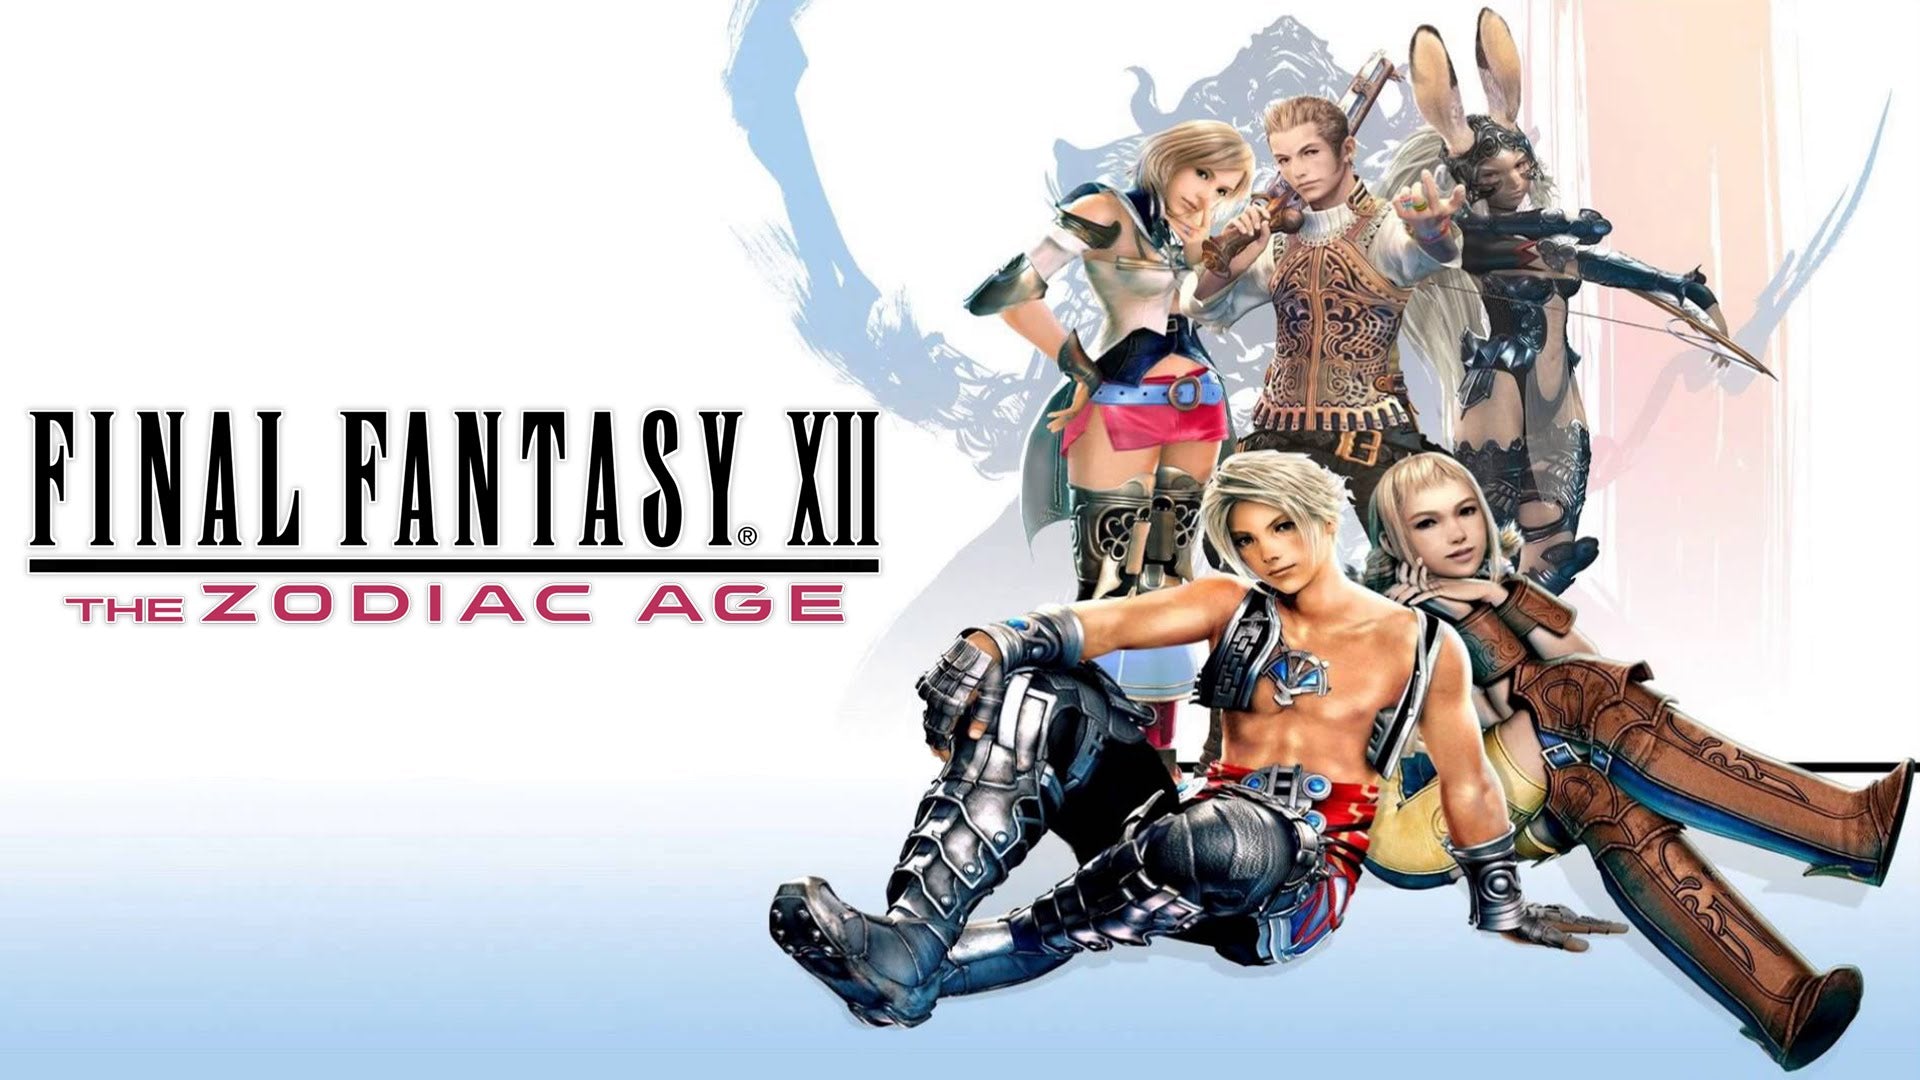 [Switch Save Progression] - FINAL FANTASY XII THE ZODIAC AGE - Super Starter Save/Mod/Max Akirac Other Mods Seasonal and Non Seasonal Save Mod - Modded Items and Gear - Hacks - Cheats - Trainers for Playstation 4 - Playstation 5 - Nintendo Switch - Xbox One